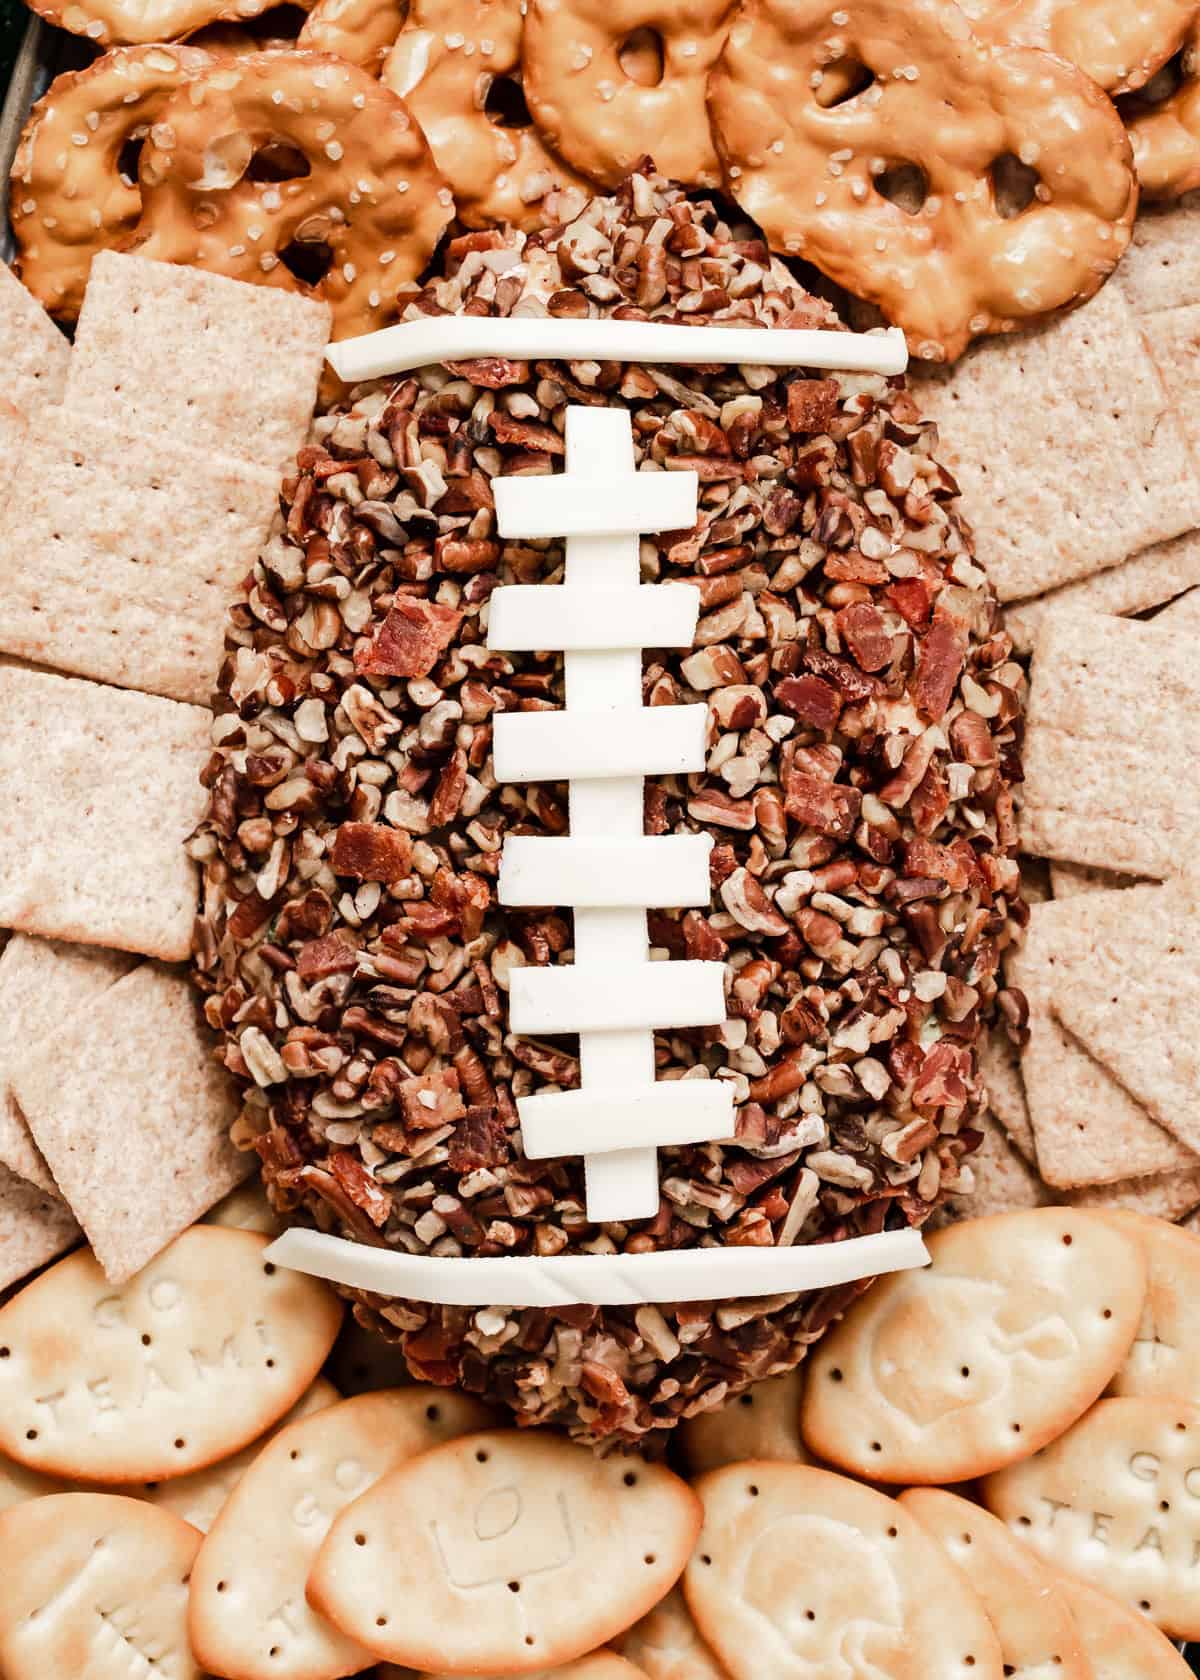 close up of cheese ball shaped like a football covered in chopped pecans and bacon bits with white cheese stitching.